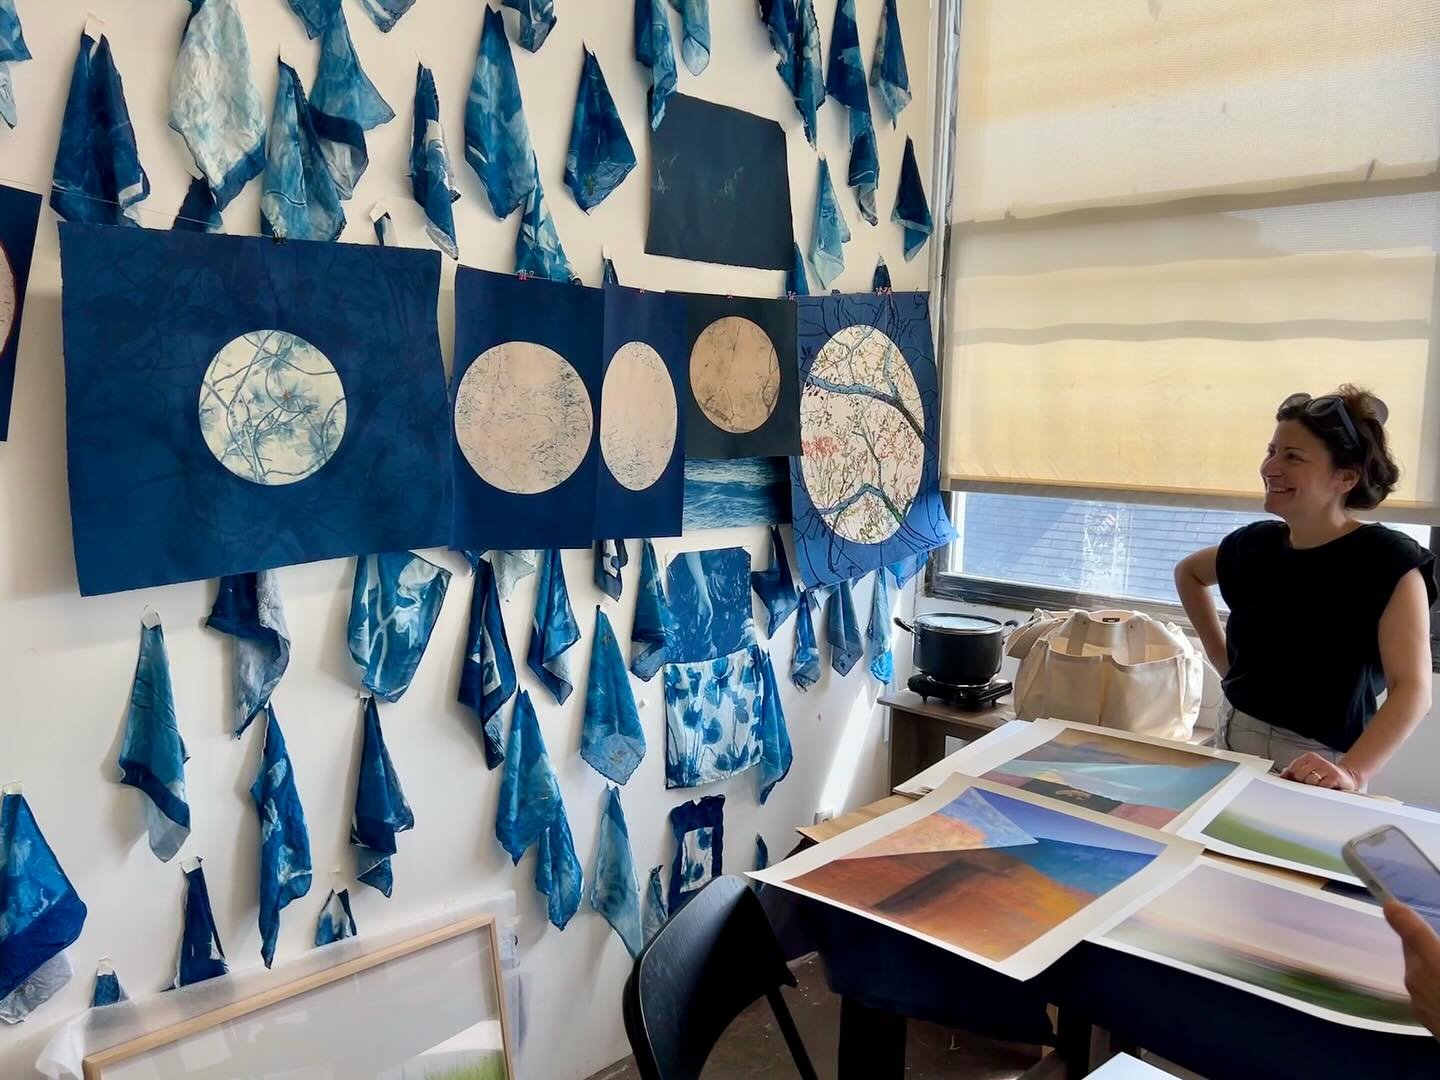 Recent studio visit with @dorasomosiphotography and @ffarrell4. Dora is always popping with creative ideas - and so great to see what she is thinking about and working on. Embroidery, moons, gold leaf, collage, cyanotypes, and new photography!  There